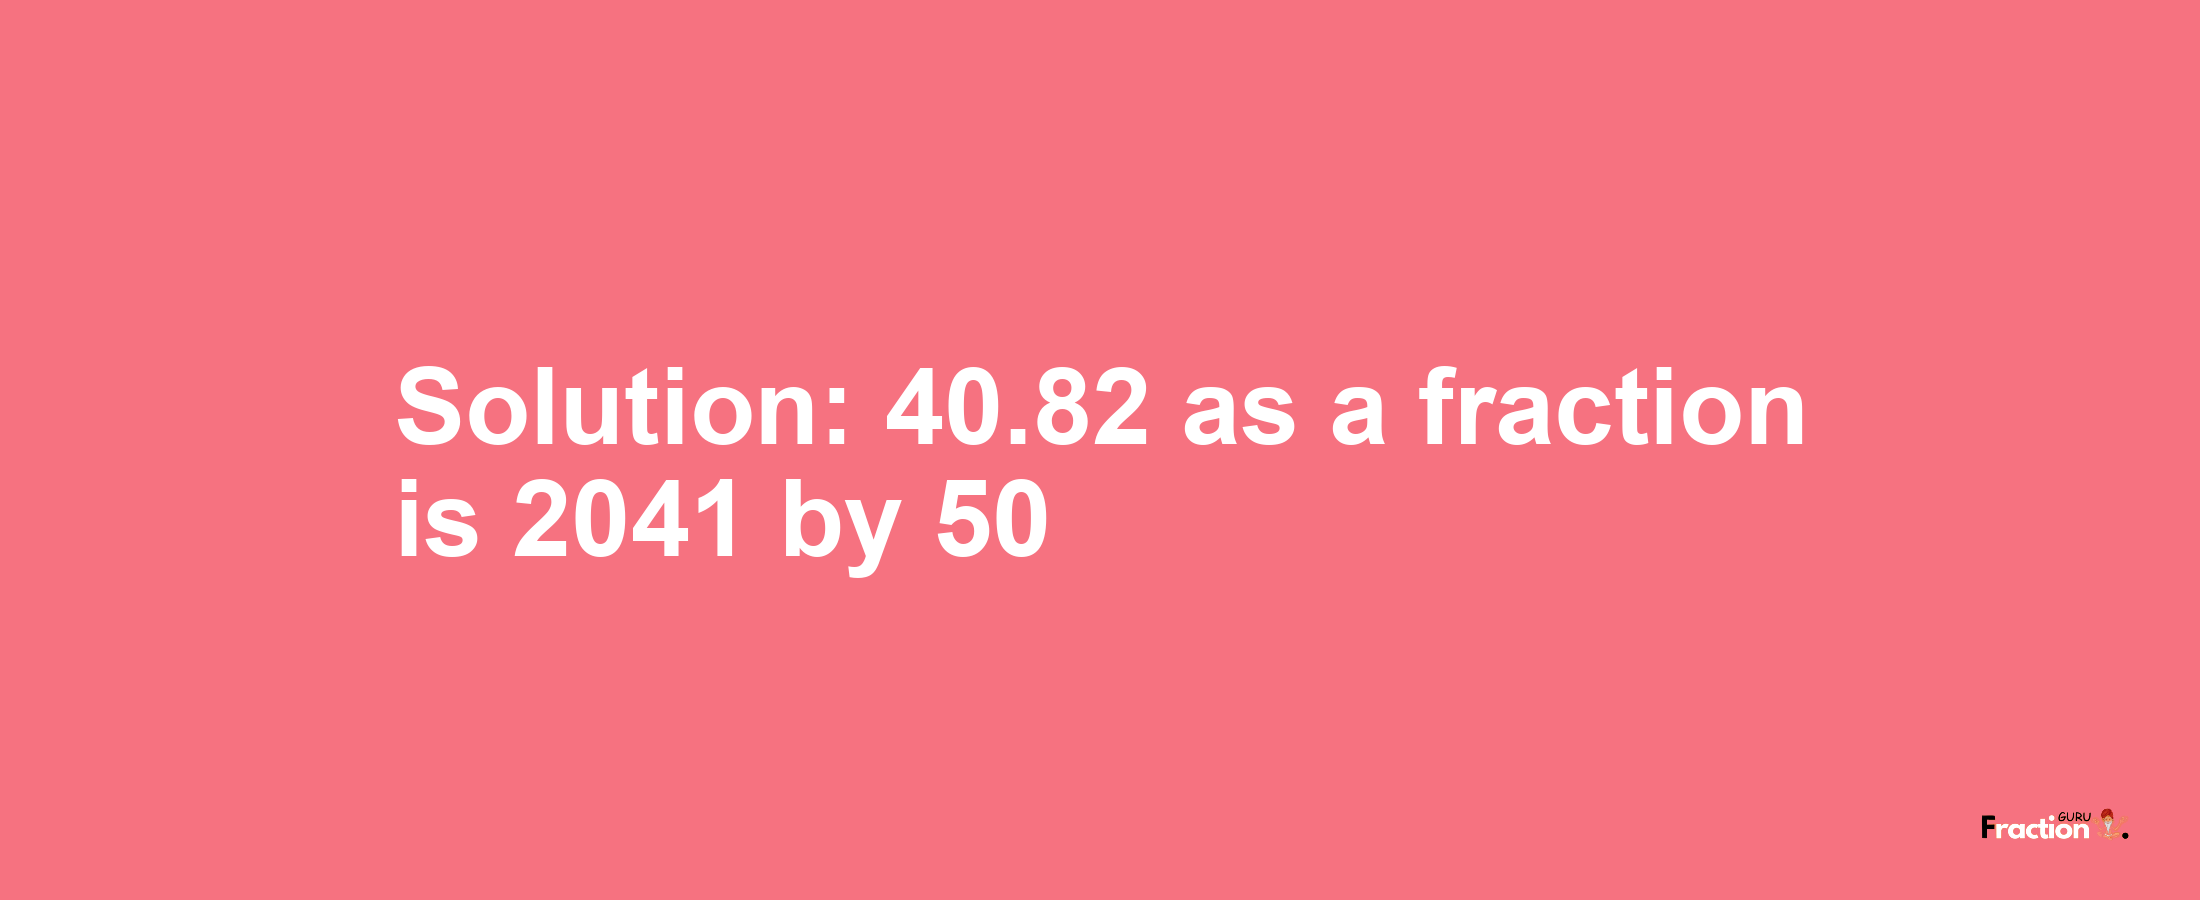 Solution:40.82 as a fraction is 2041/50